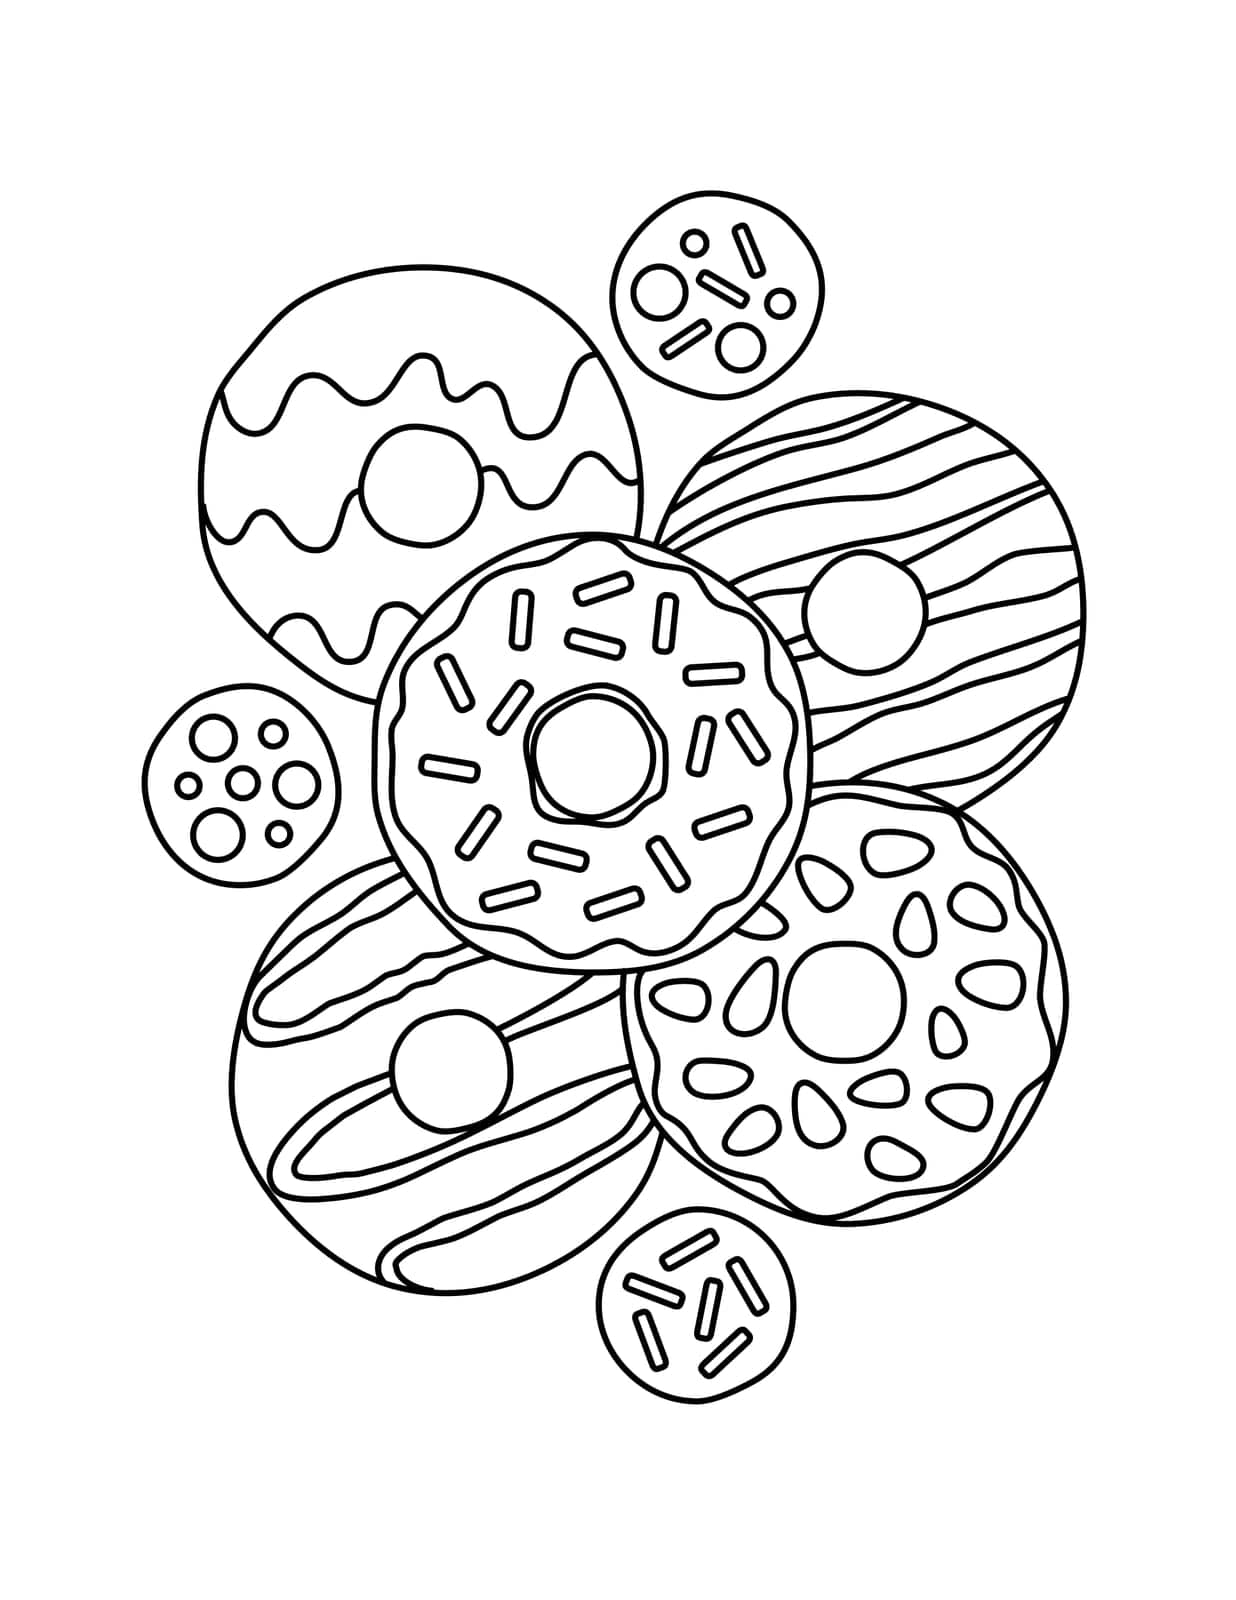 Cute Donut Black Outline Coloring Page